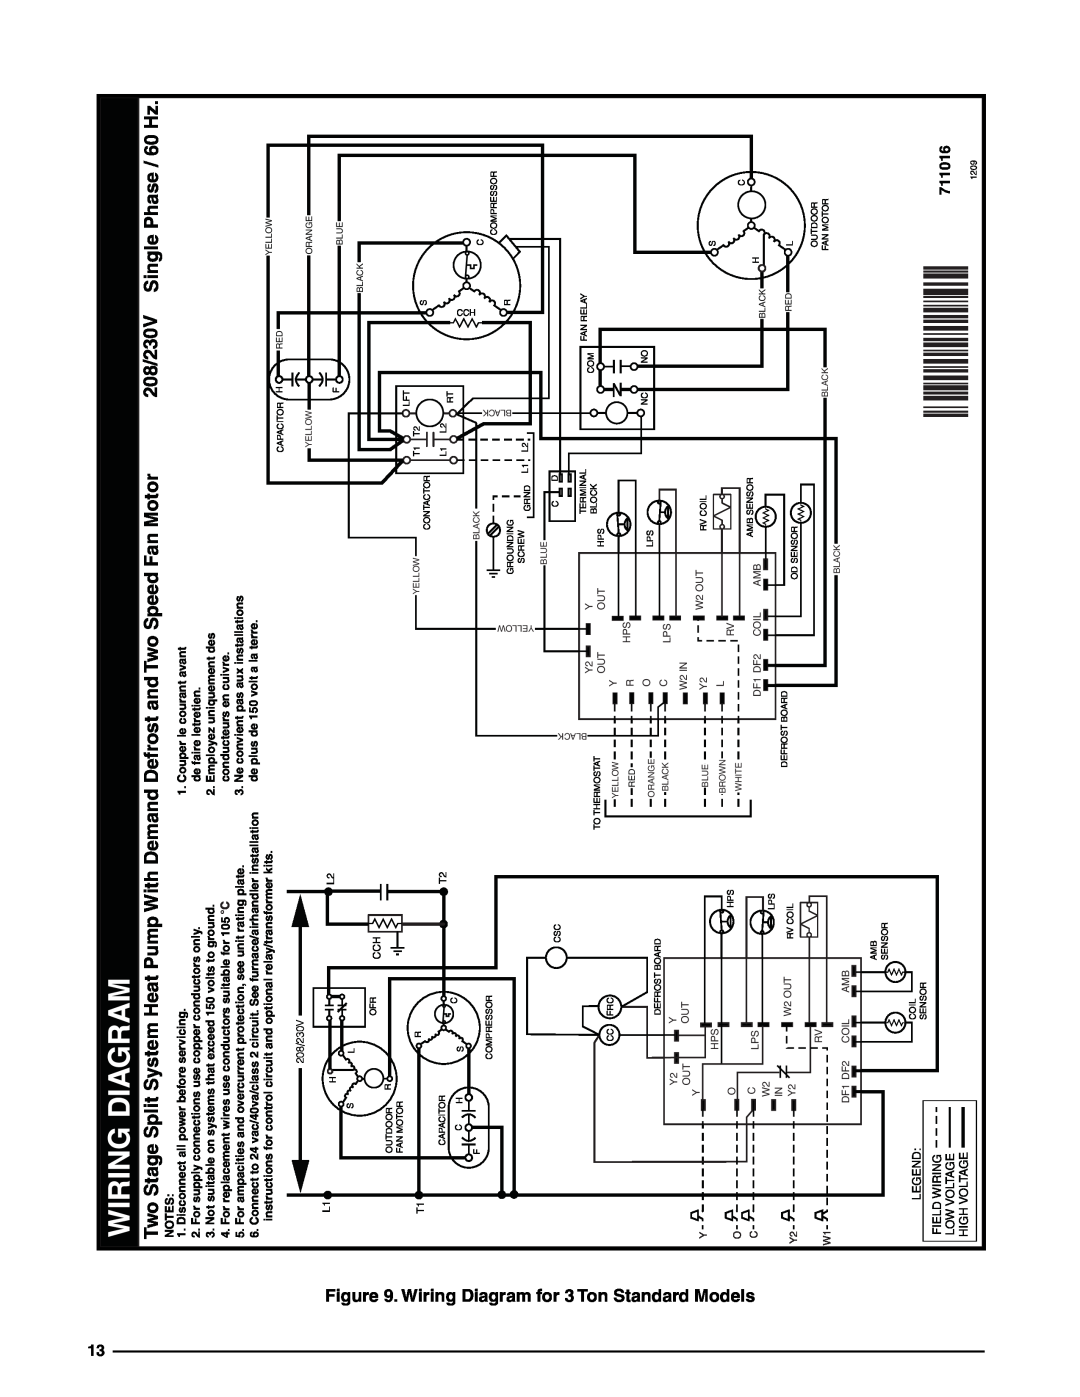 Heat Controller R-410A ¢711016q¤, Wiring Diagram, 208/230V Single Phase / 60 Hz, Models, for 3Ton, Standard, Low Voltage 